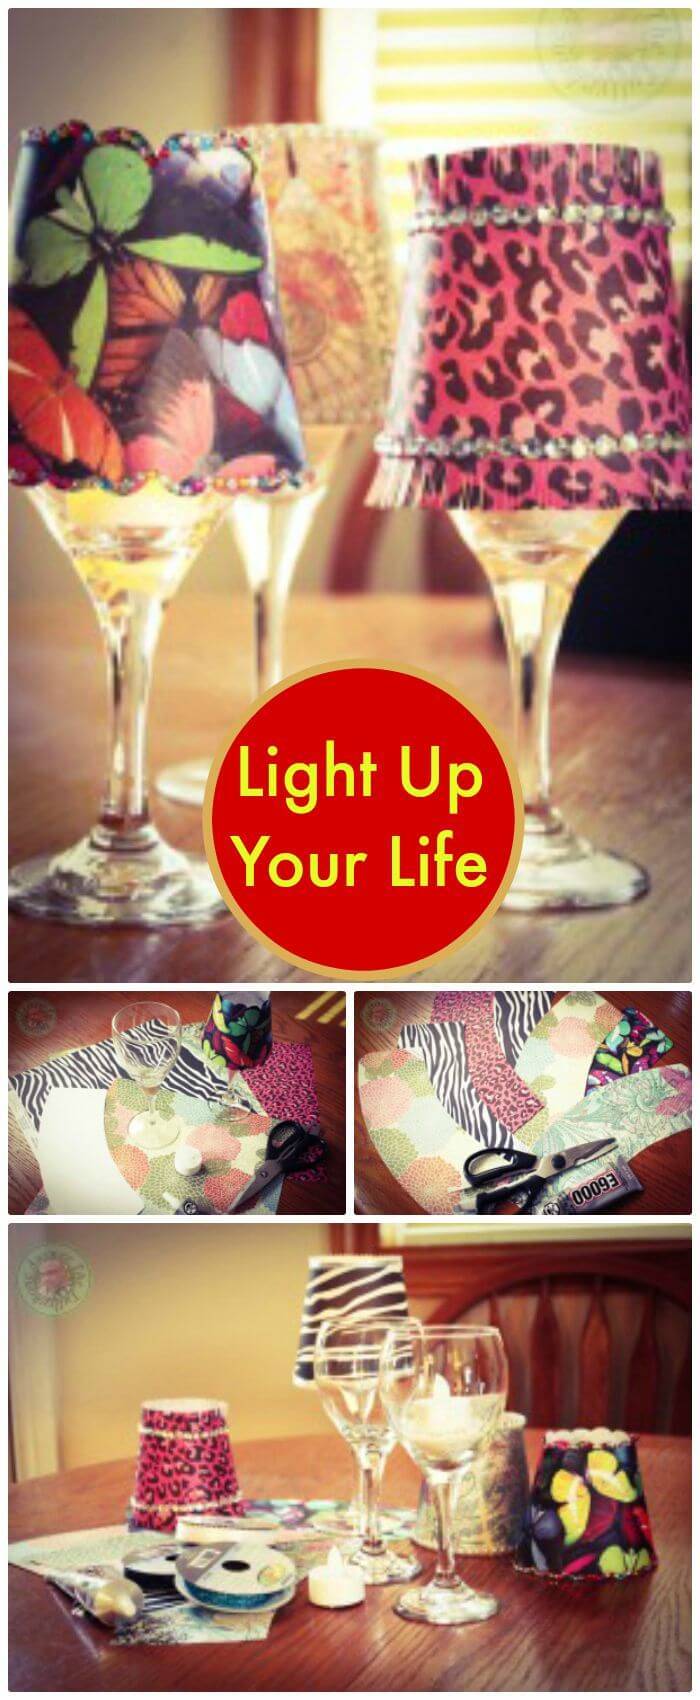 How To Light Up Your Life With This Lamp - Dollar Store Idea 